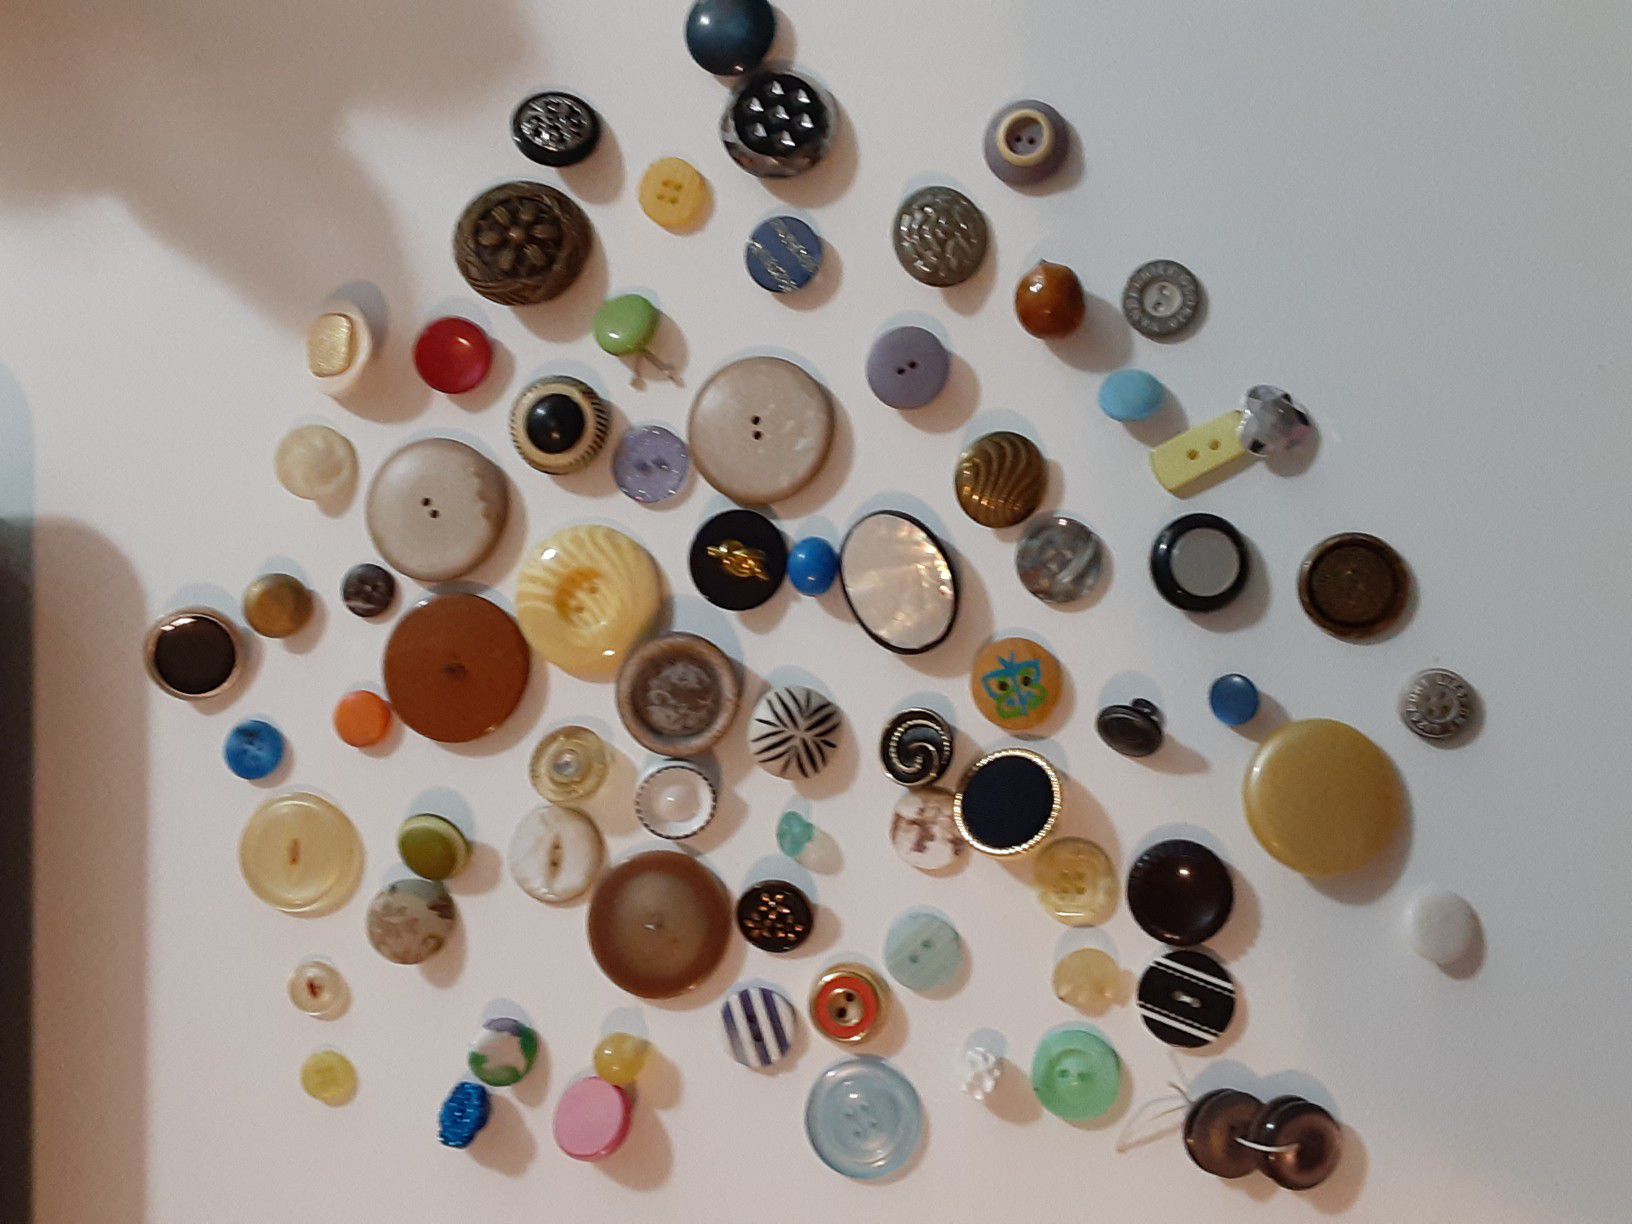 Antique buttons collection